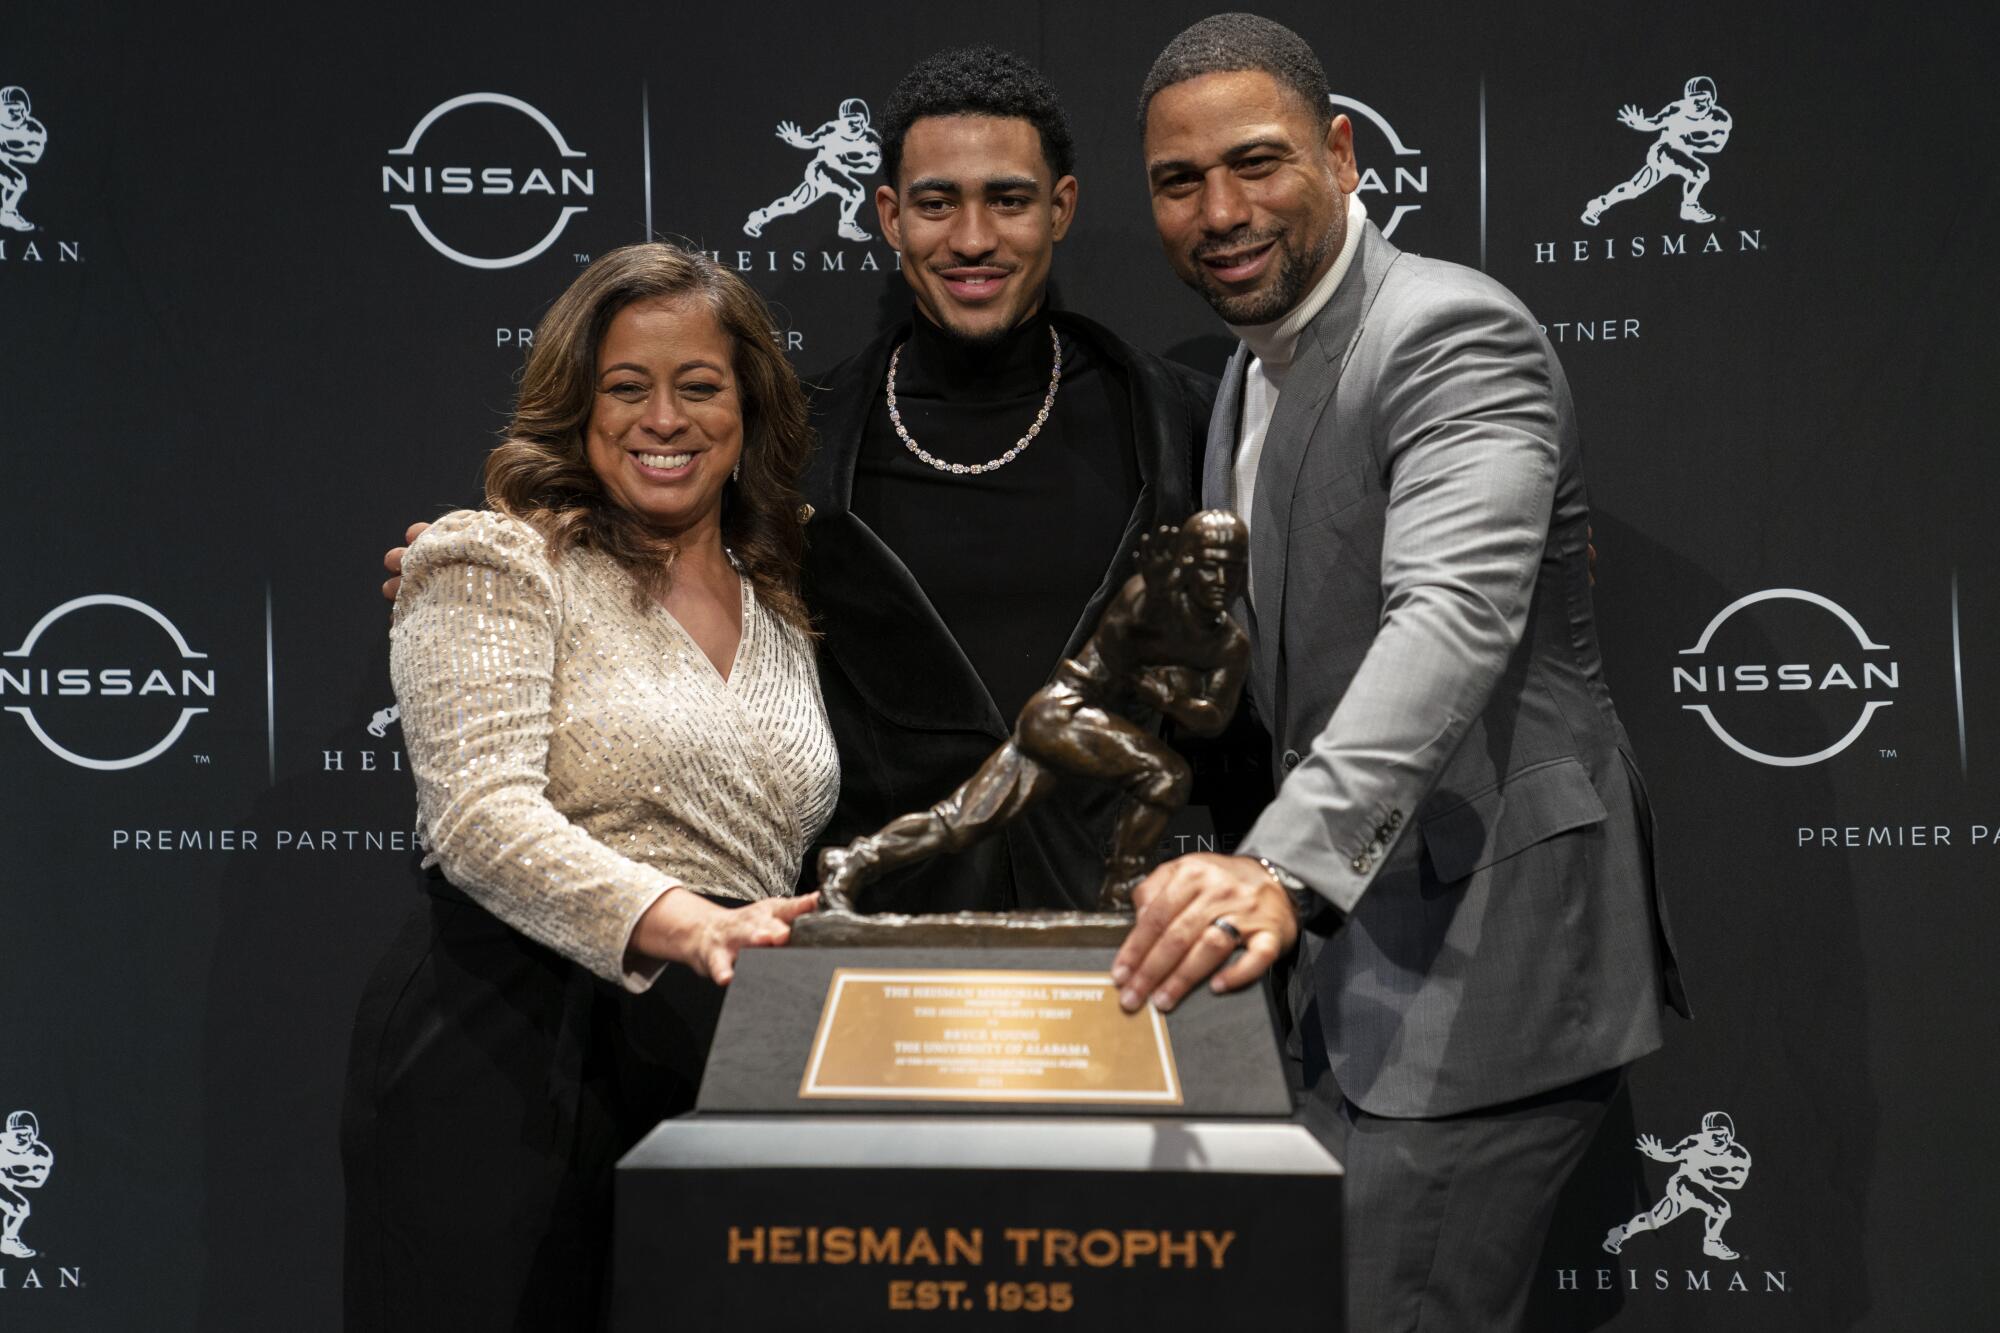 Alabama quarterback Bryce Young poses for a photograph with his parents after winning the Heisman Trophy on Dec. 11, 2021.